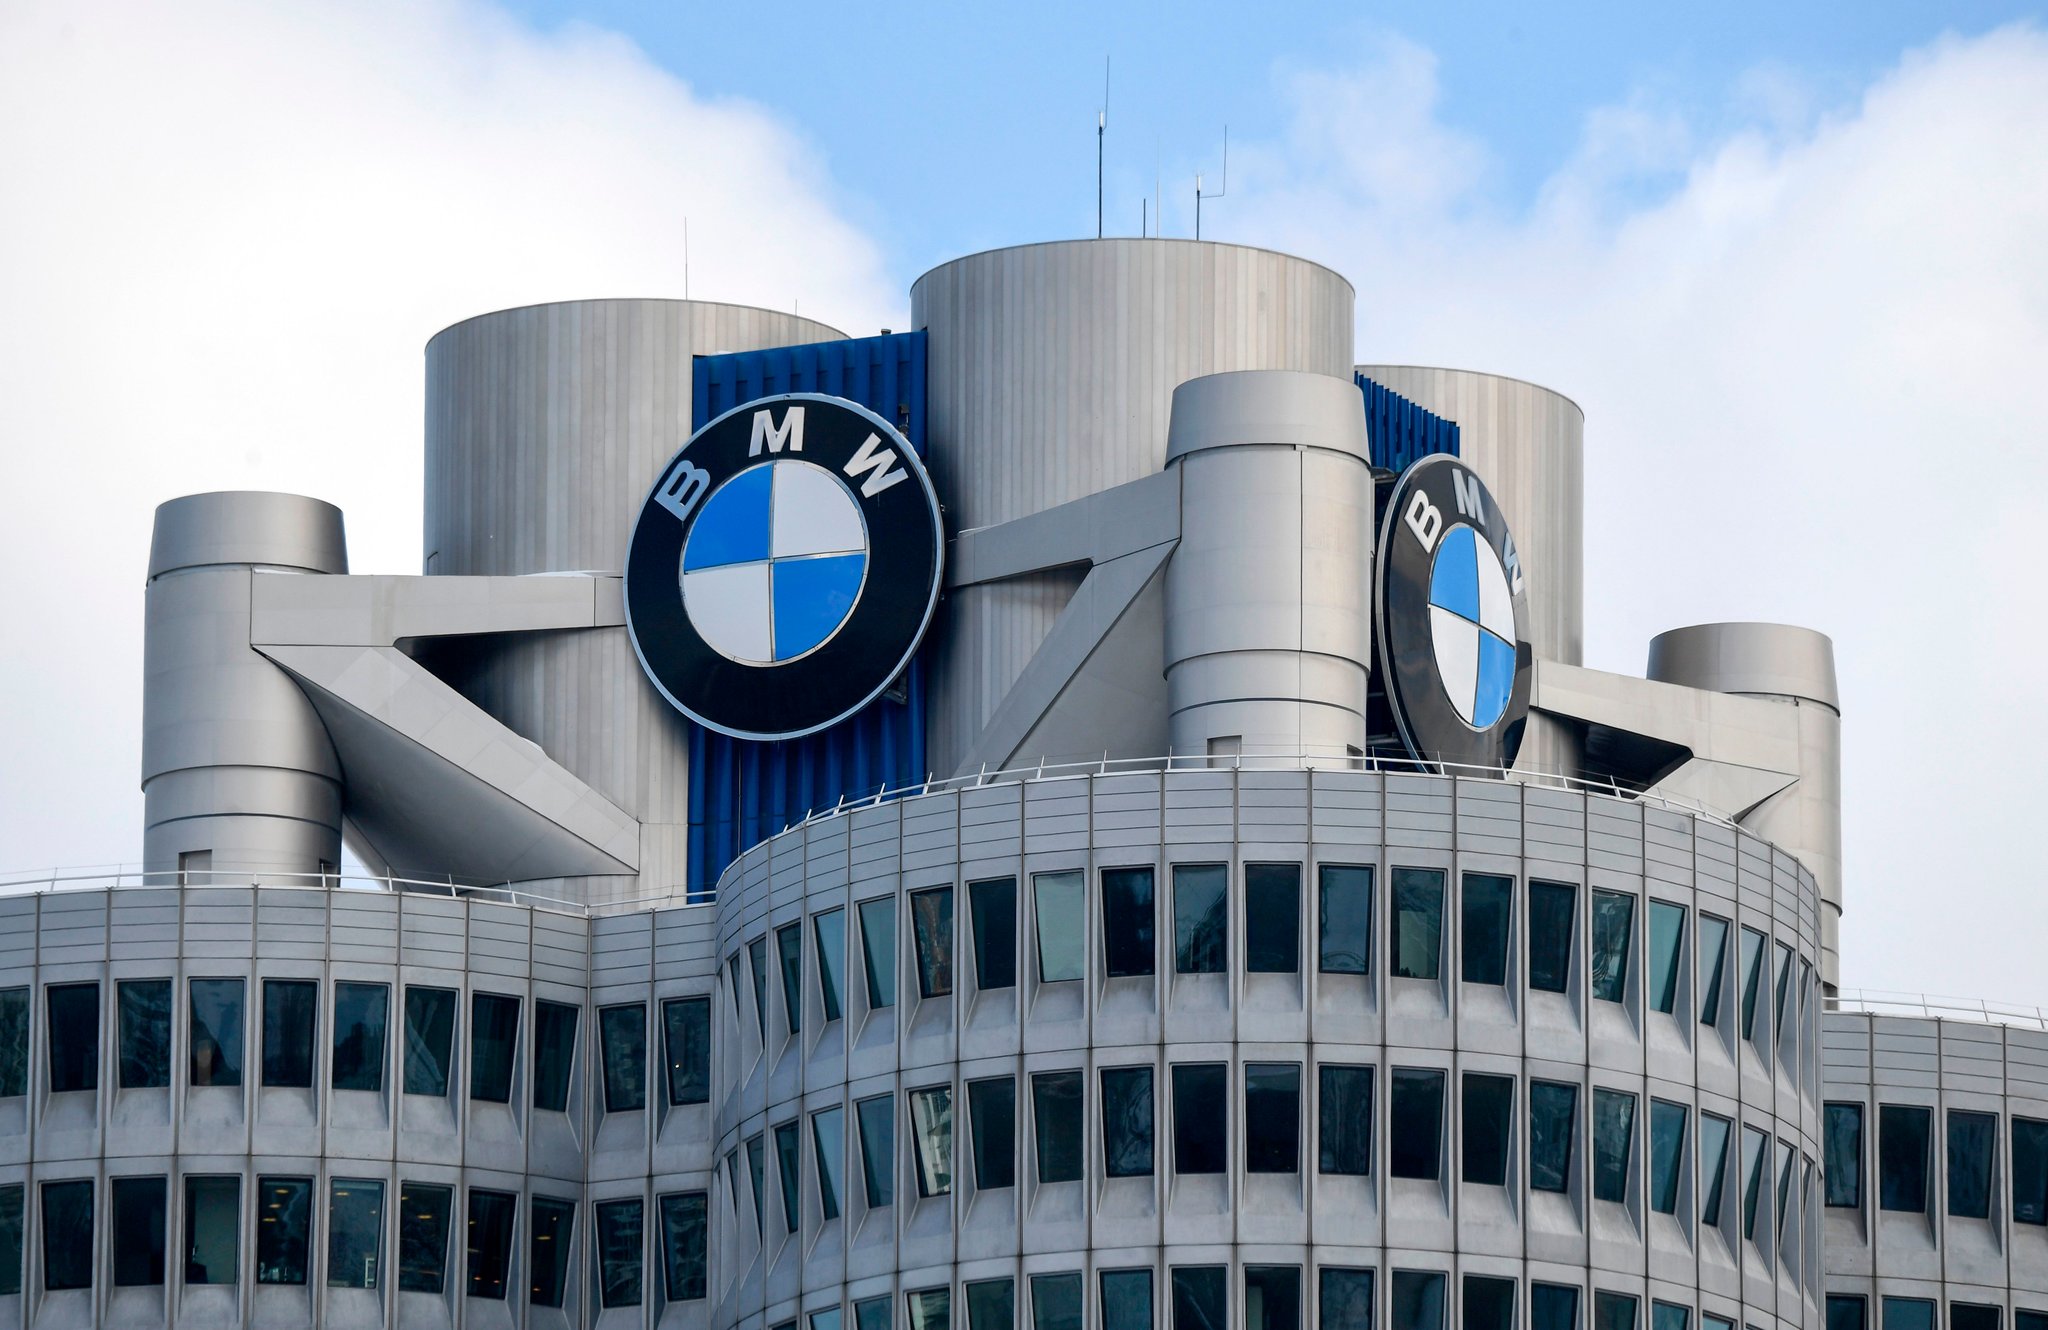 GST ITC not allowable to BMW on demo car or vehicle: AAAR